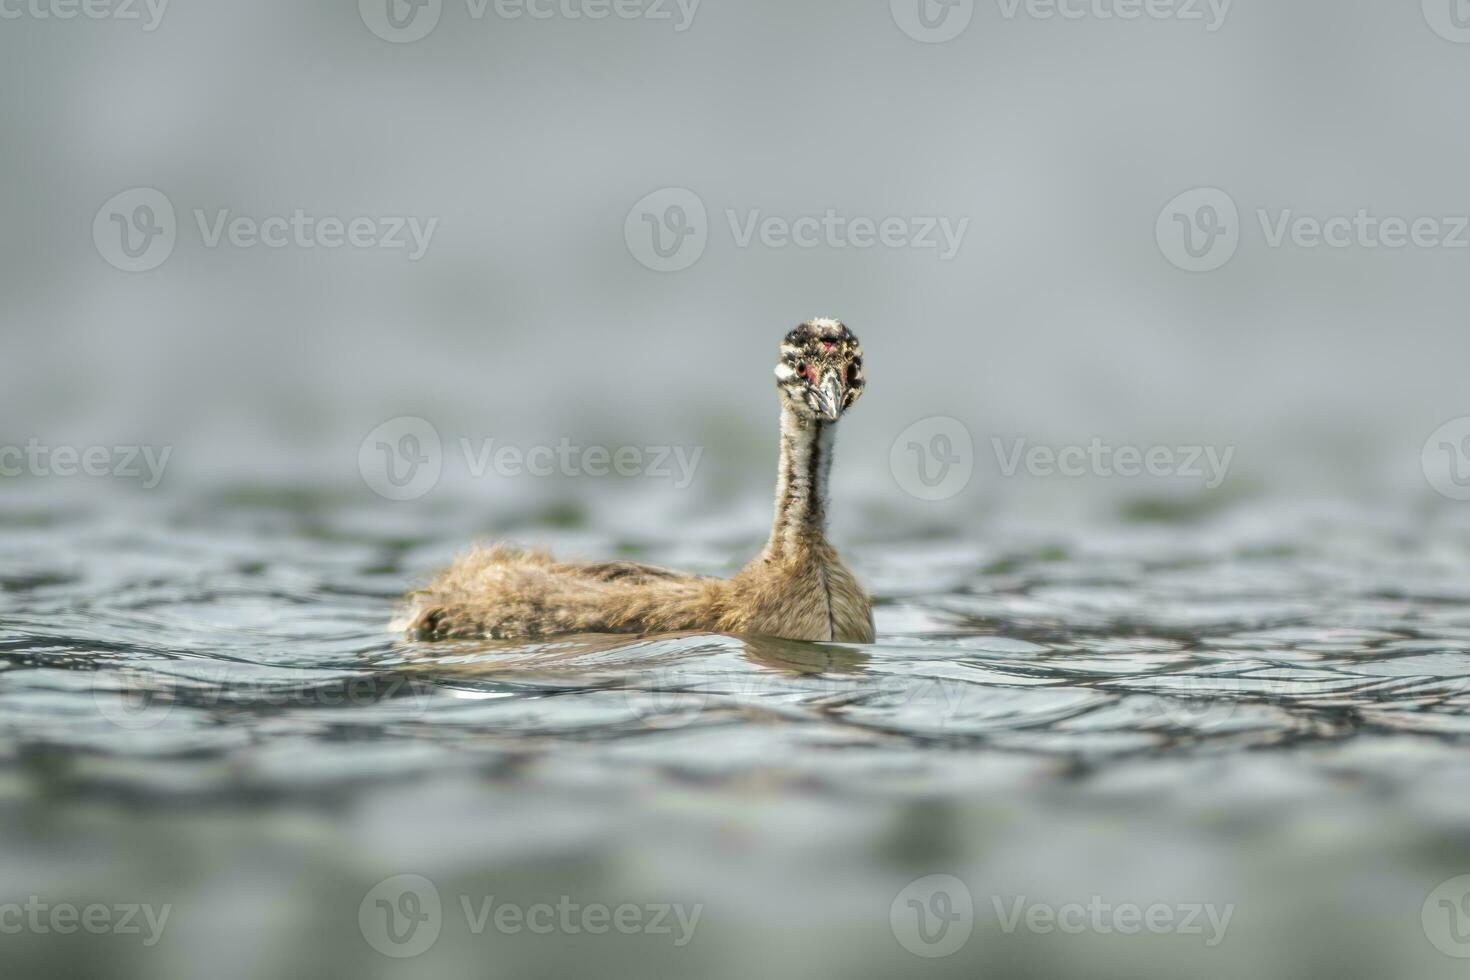 one young Great crested grebe chick Podiceps cristatus swims on a reflective lake photo